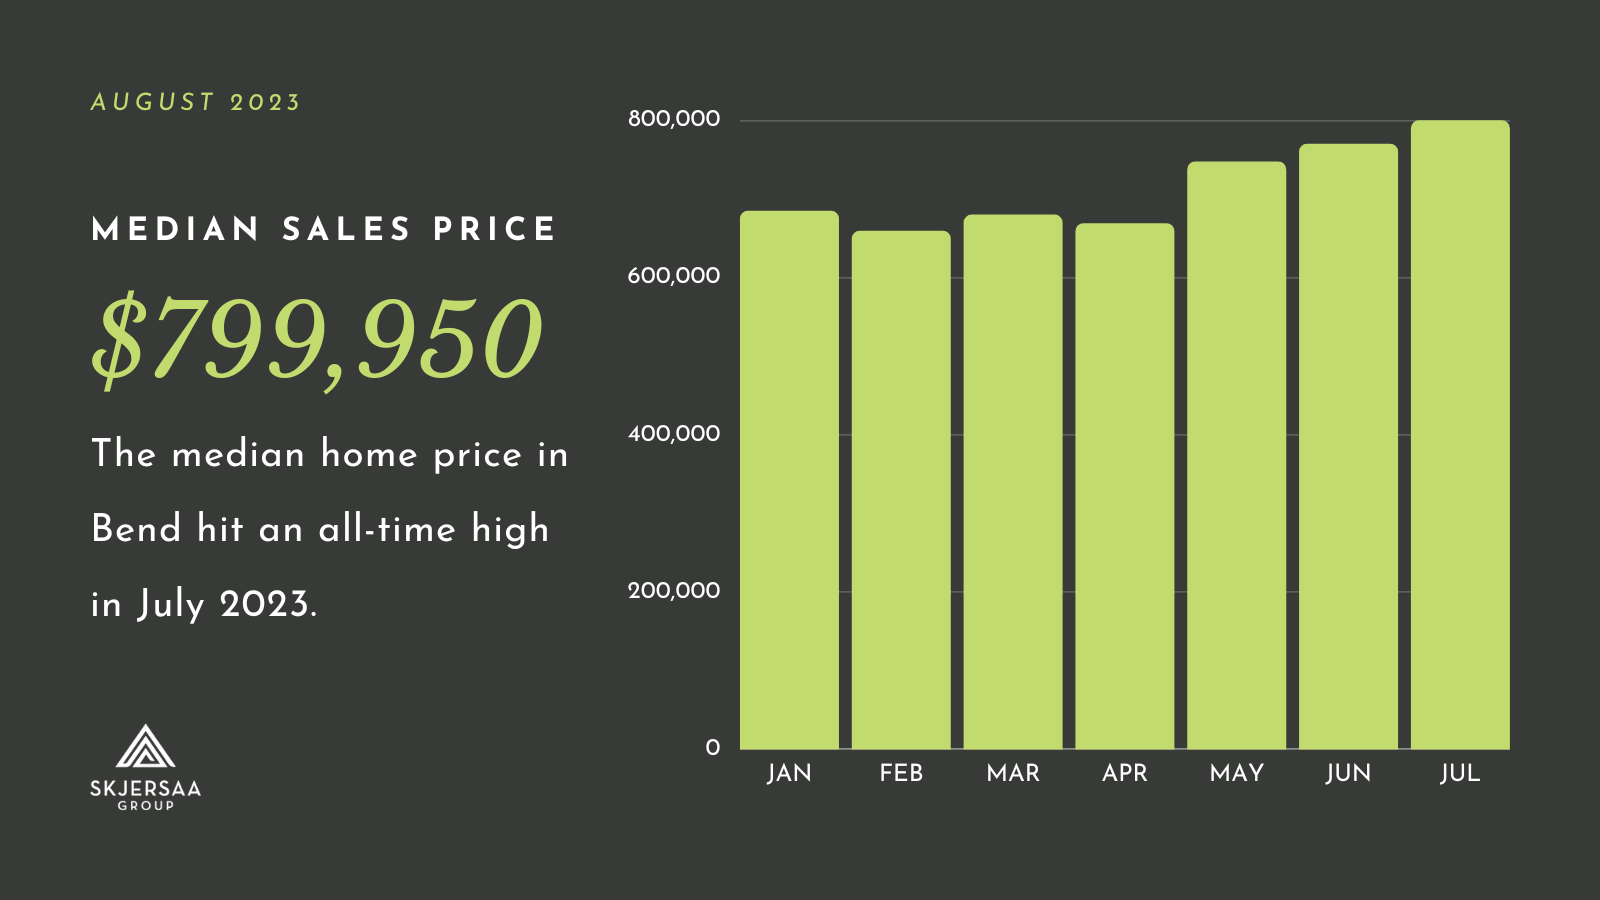 Graph showing the median home price in Bend from January 2023 to July 2023. The median sales price is at an all-time high of $799,950.